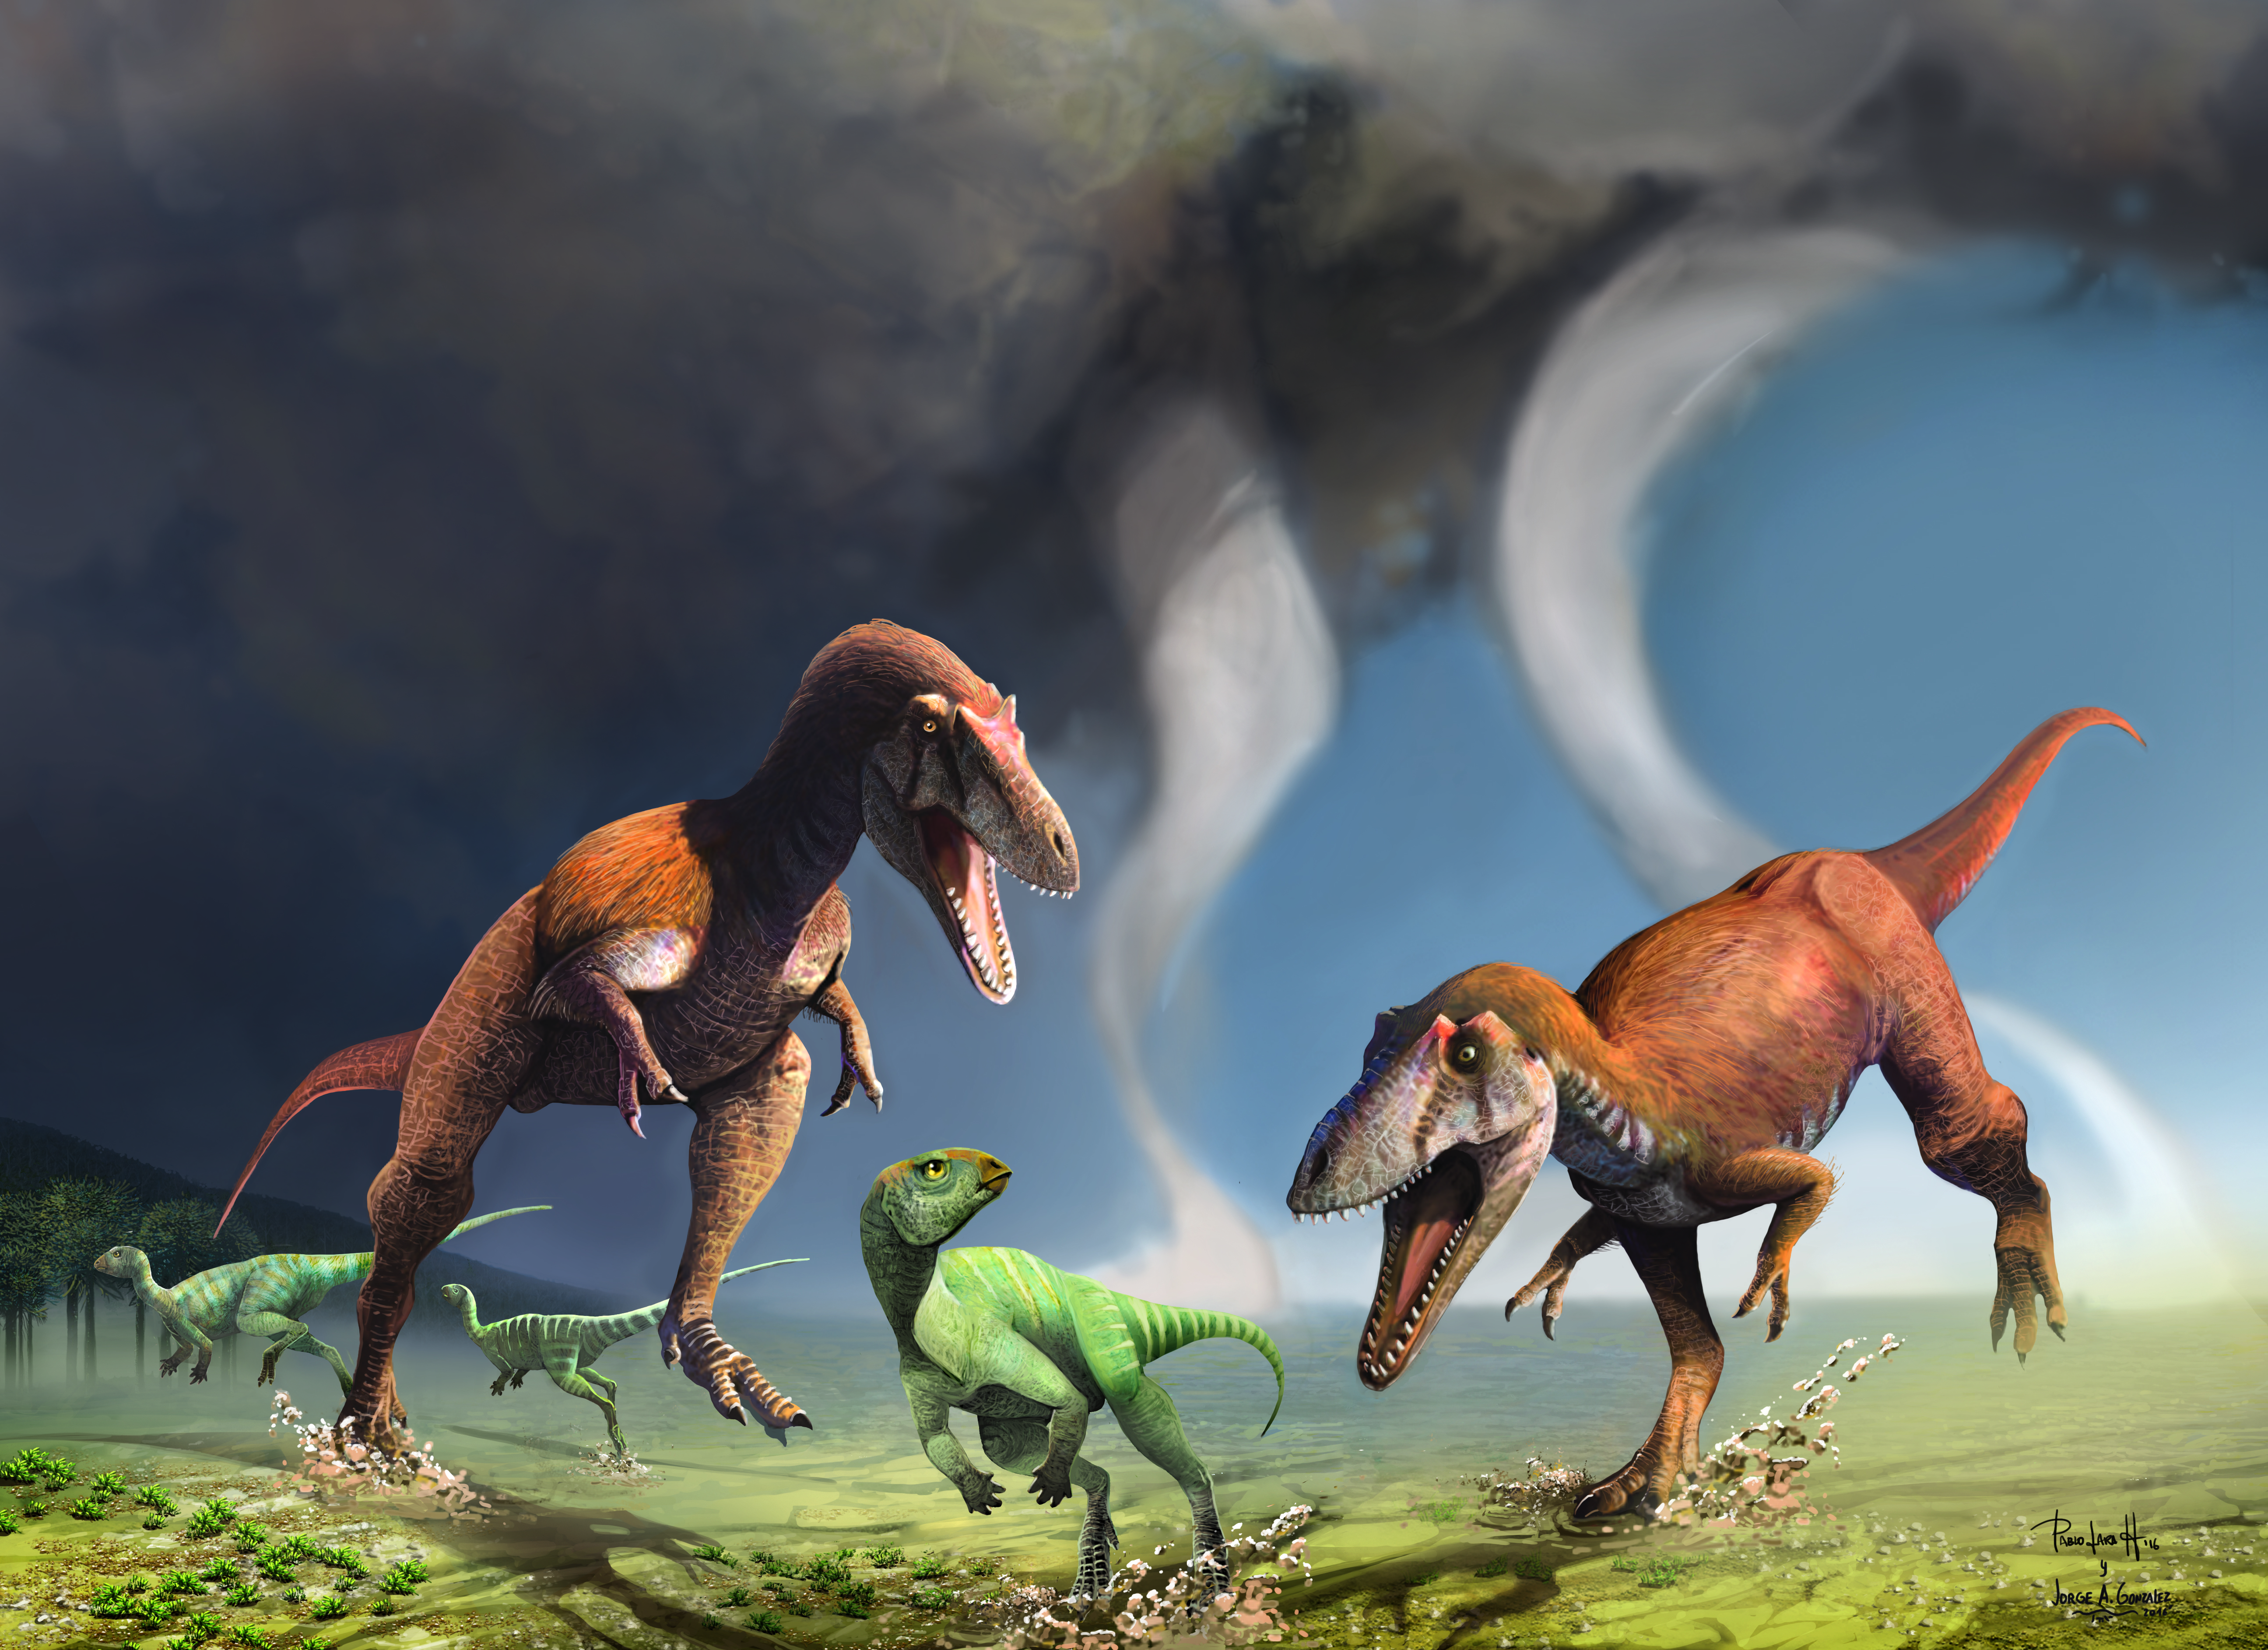 An artist's rendering of a small dinosaur being chased through a field by two larger dinosaurs, while two other small dinosaurs run away in the background.